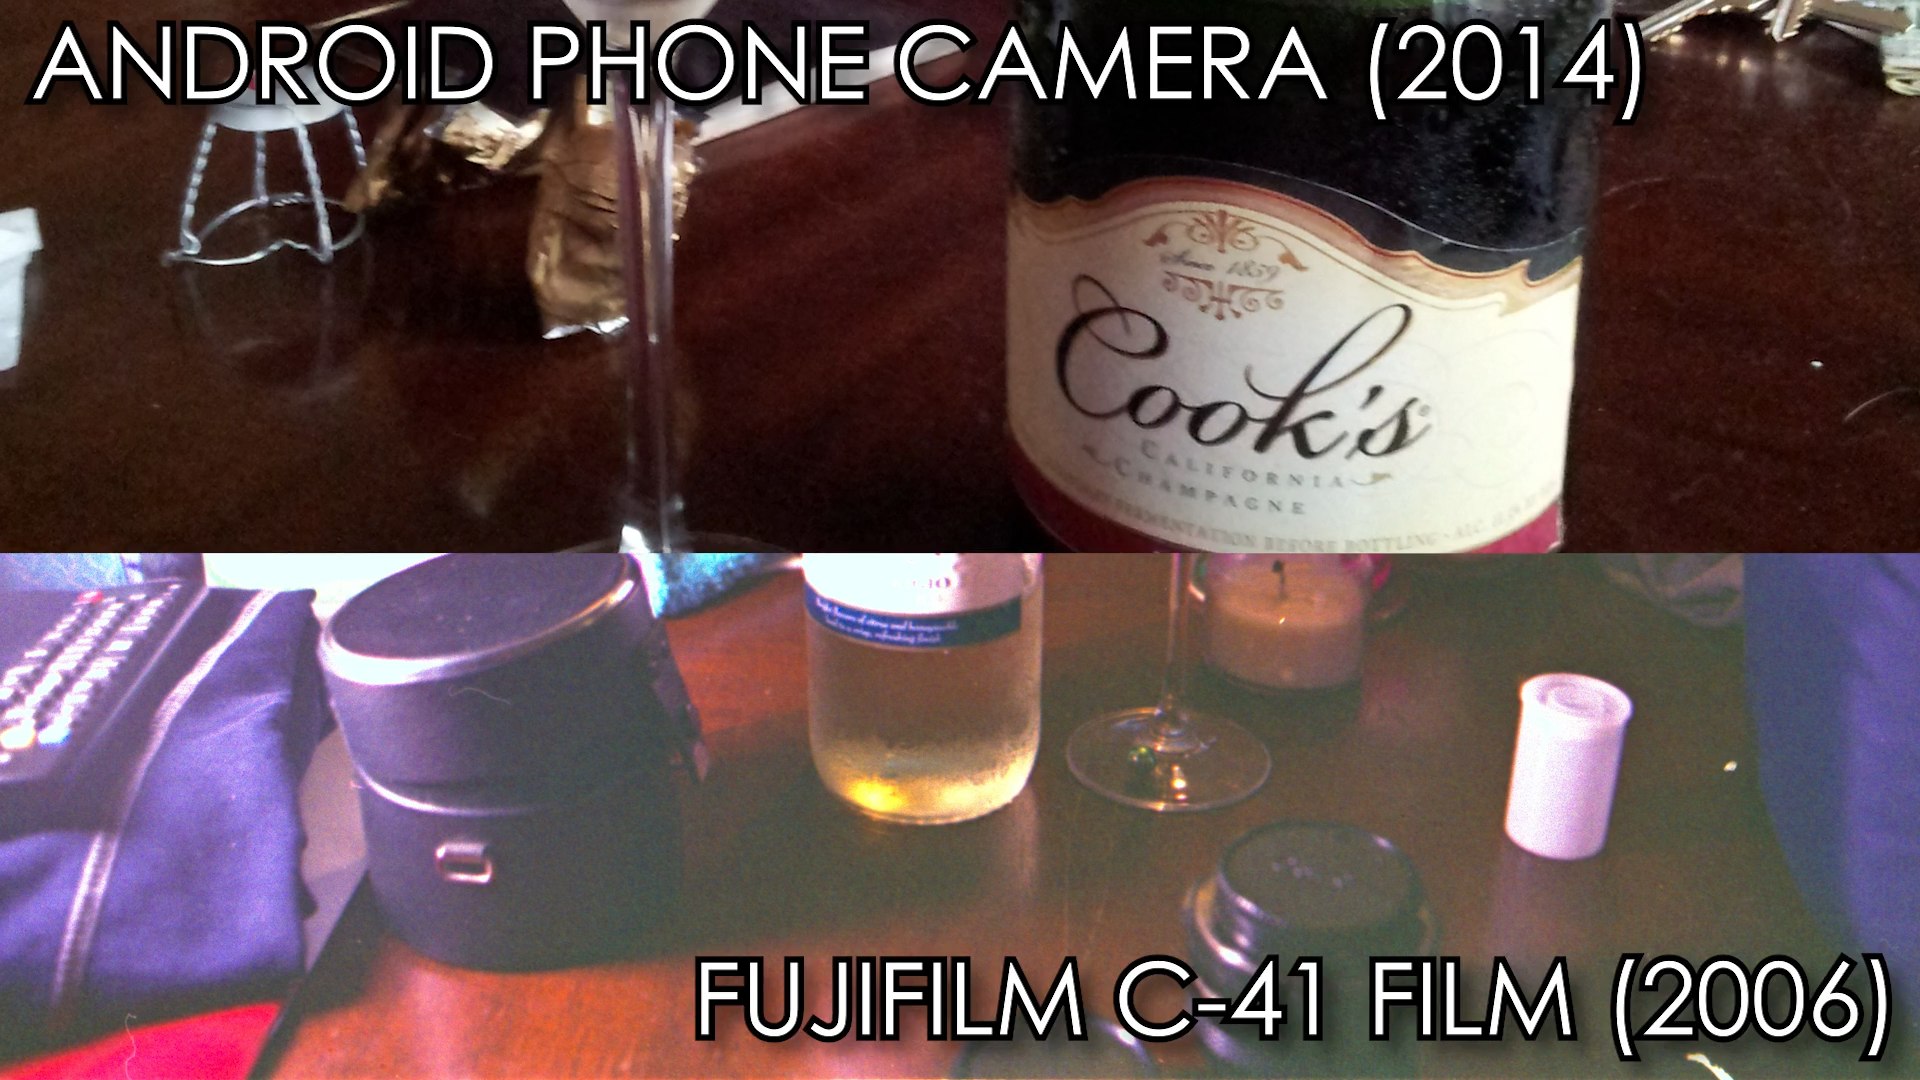 Comparison of brown color reproduction between film and digital camera